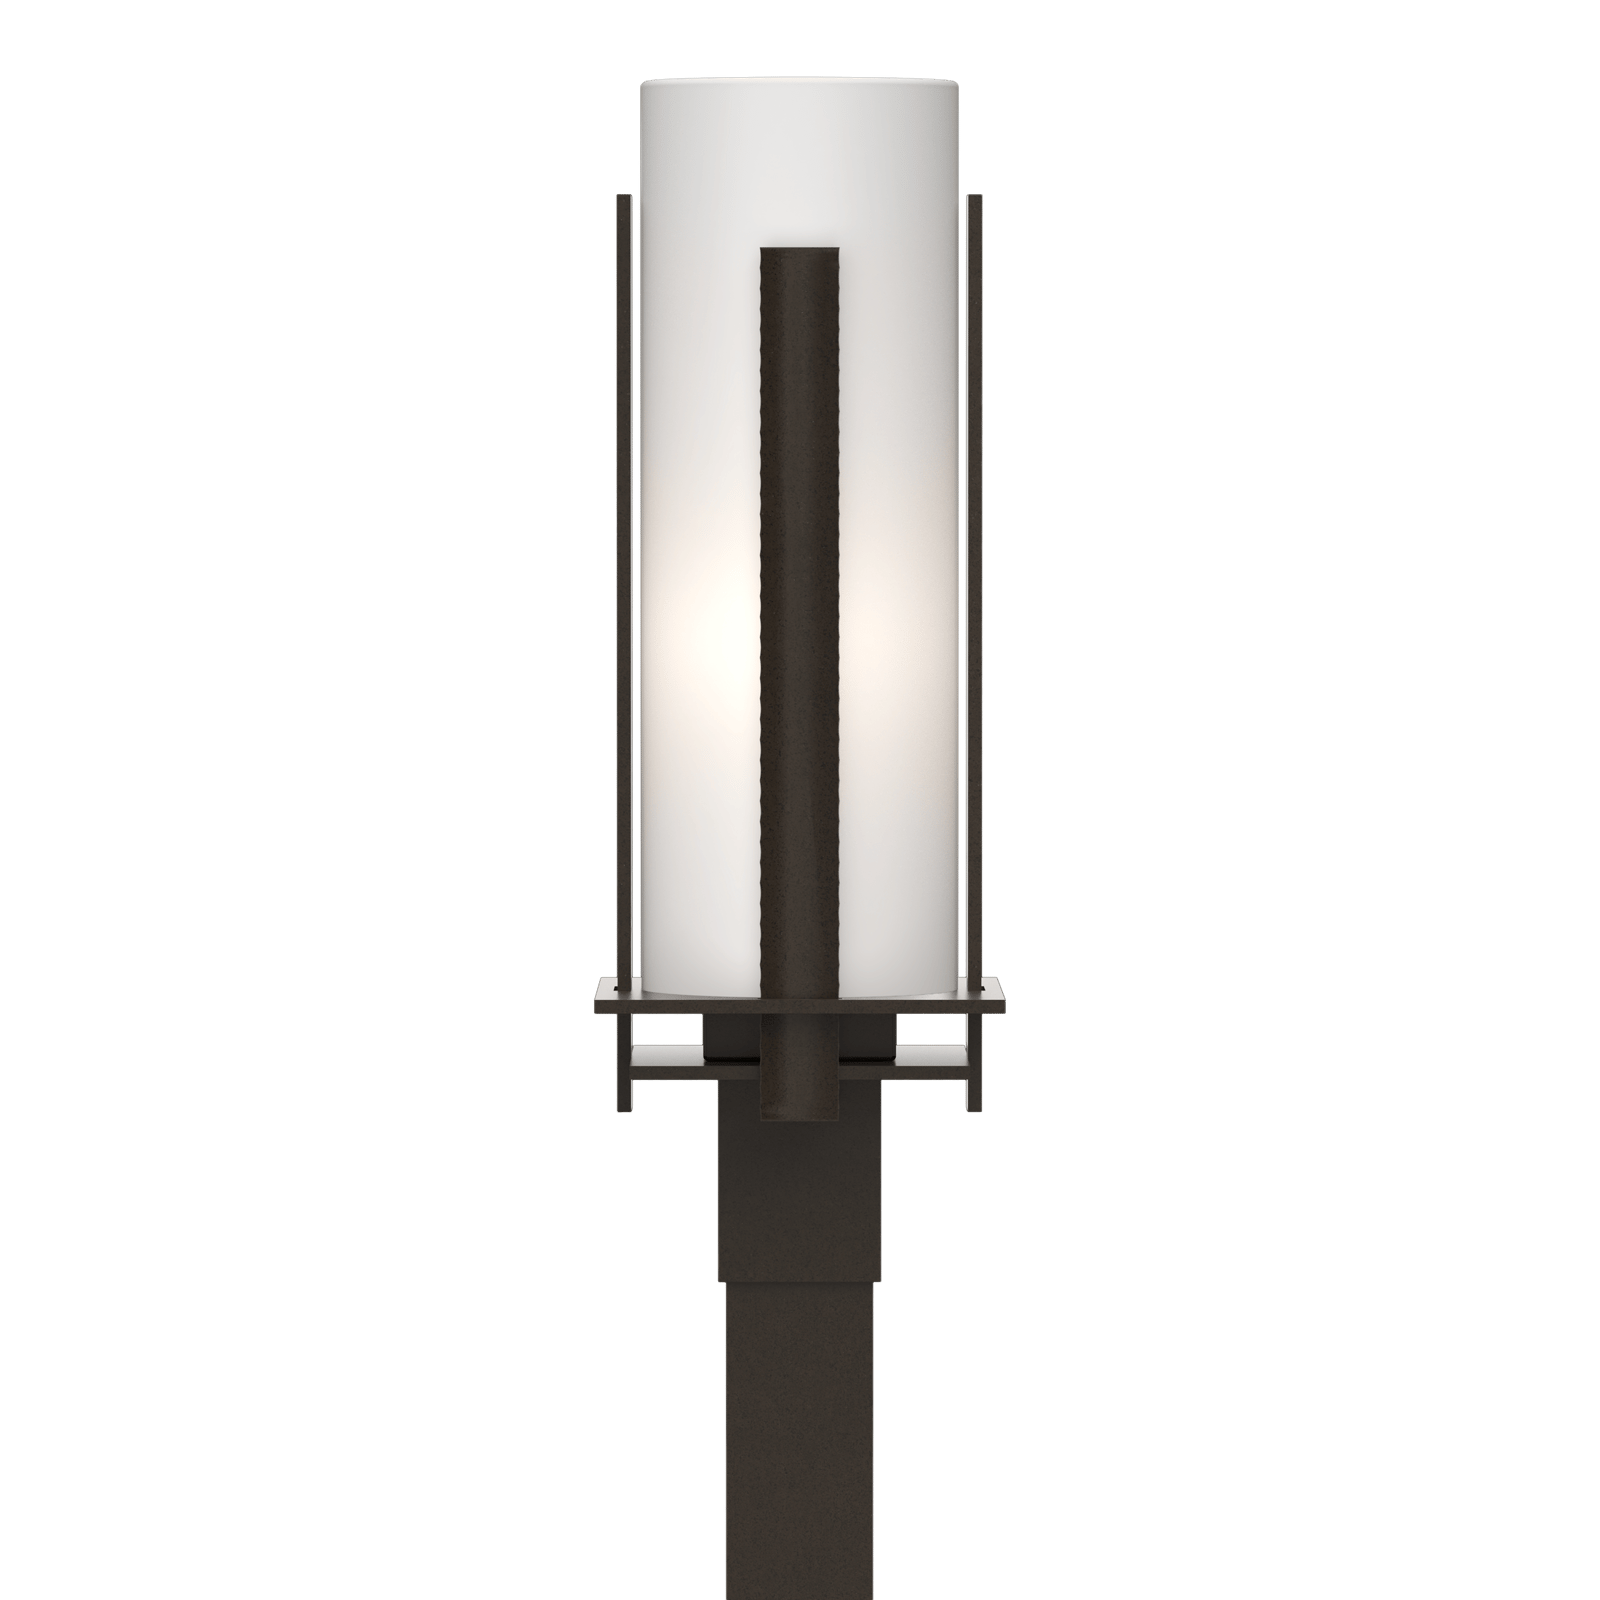 Hubbardton Forge Forged Vertical Bars Outdoor Post Light Outdoor l Post/Pier Mounts Hubbardton Forge Coastal Oil Rubbed Bronze Opal Glass (GG) 